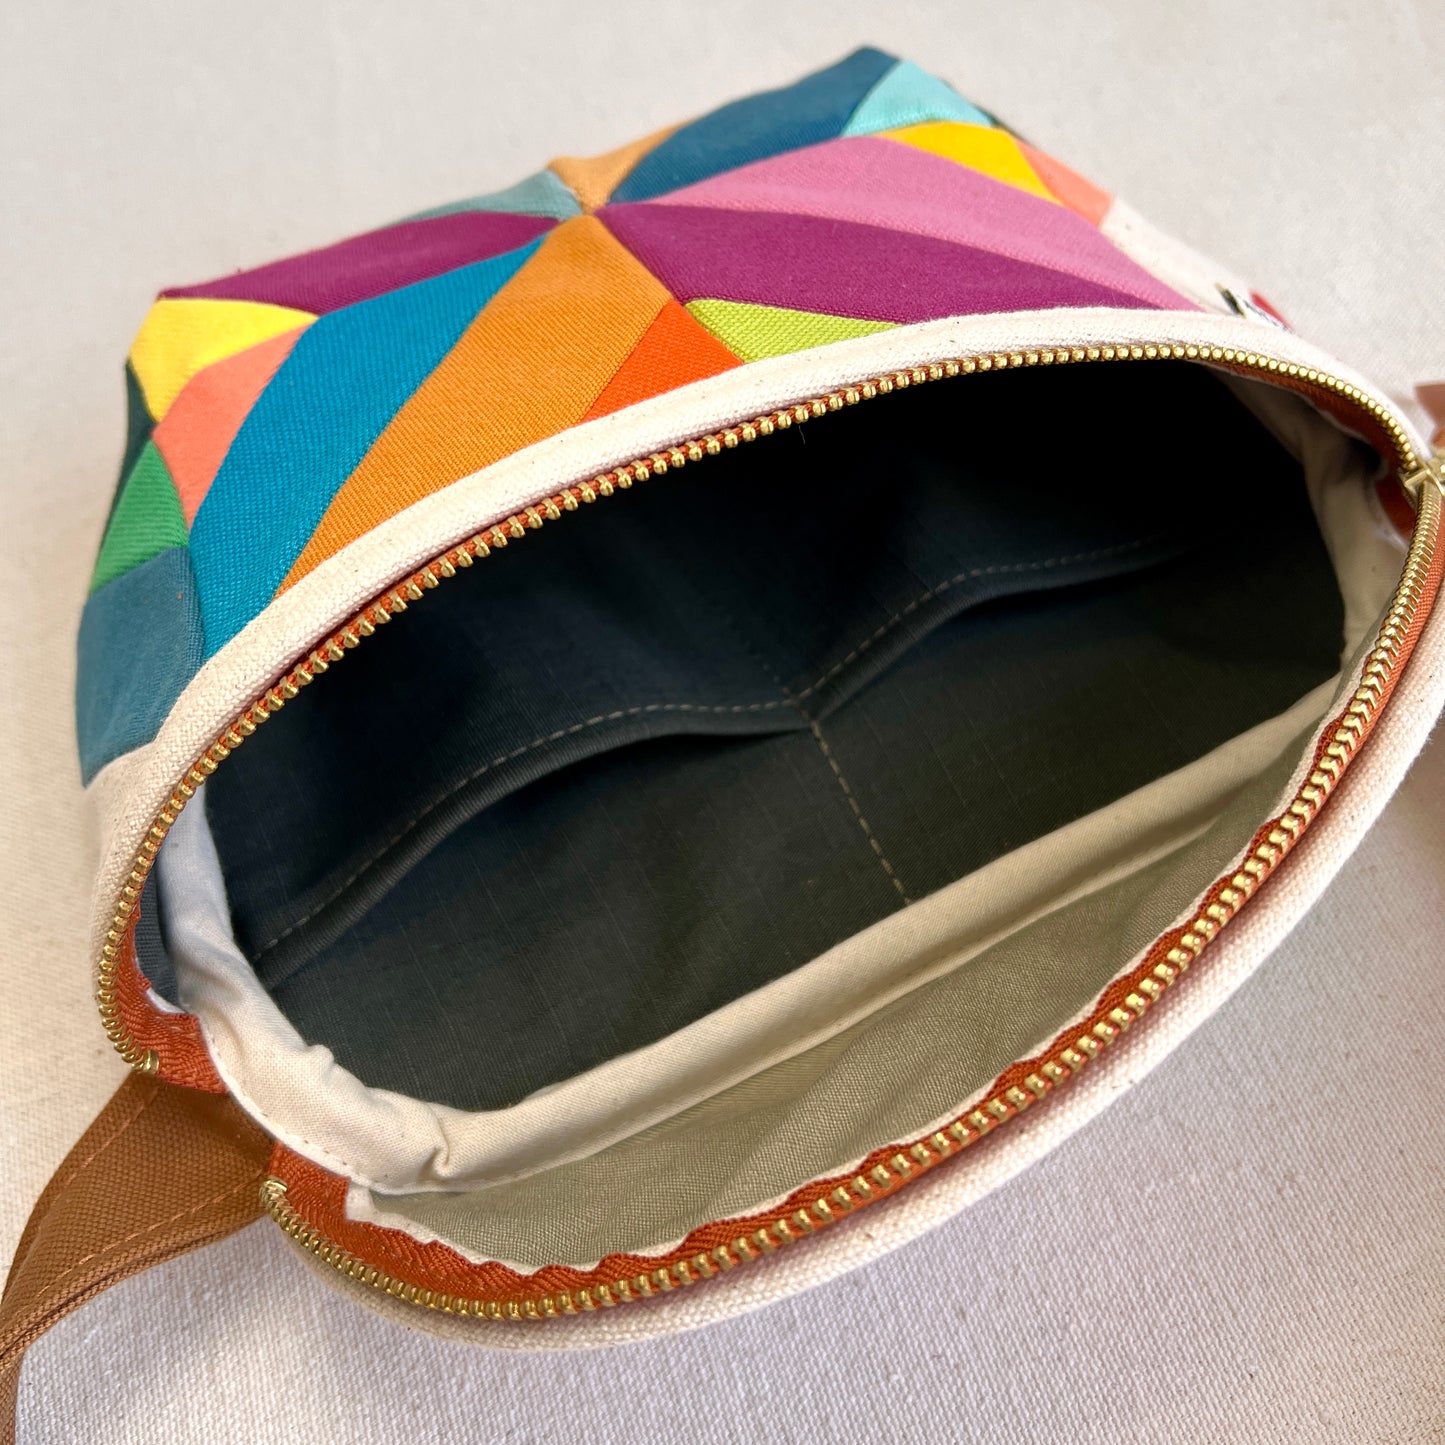 kaleidoscope fanny bag, jewel tones with brights + natural